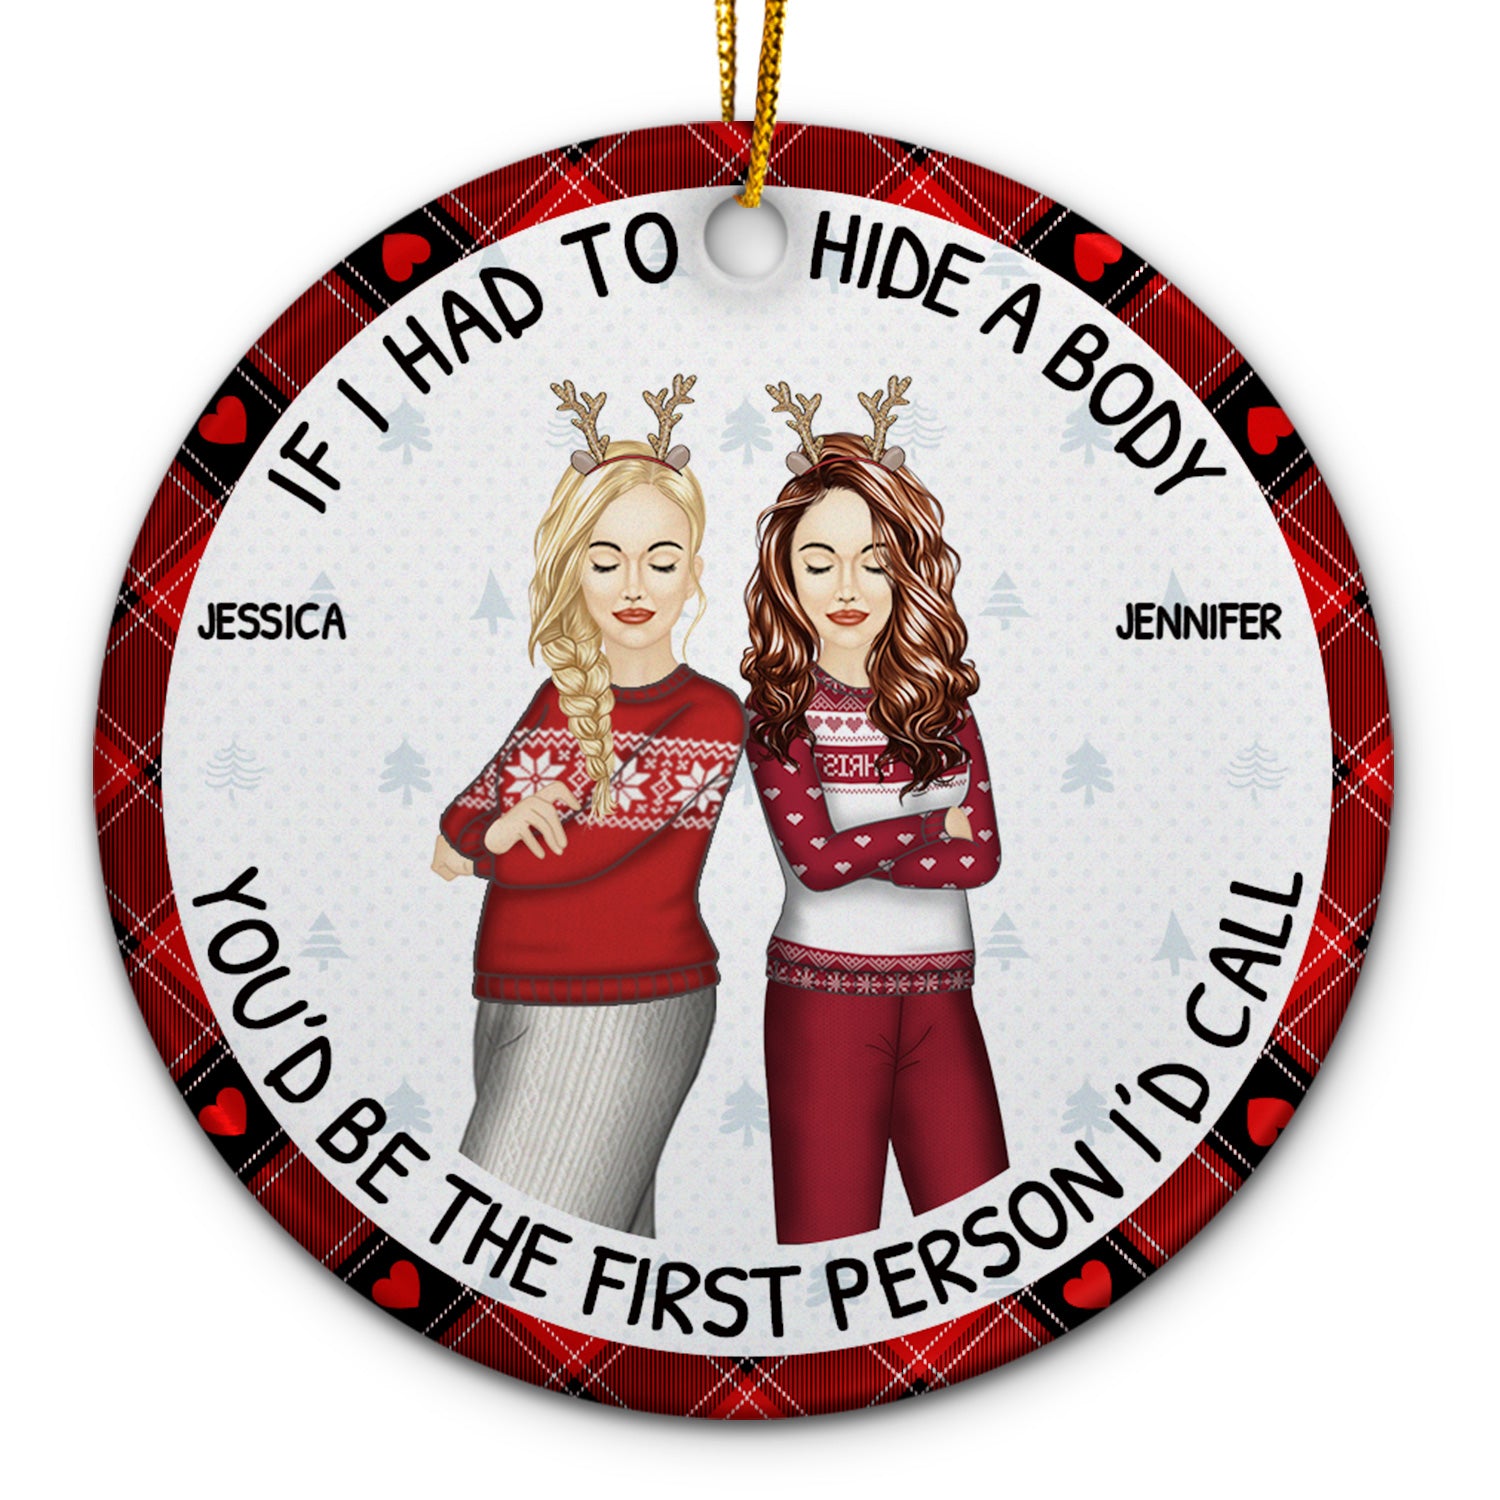 If I Had To Hide A Body - Christmas Funny Gift For Besties, Friends, Colleagues - Personalized Circle Ceramic Ornament